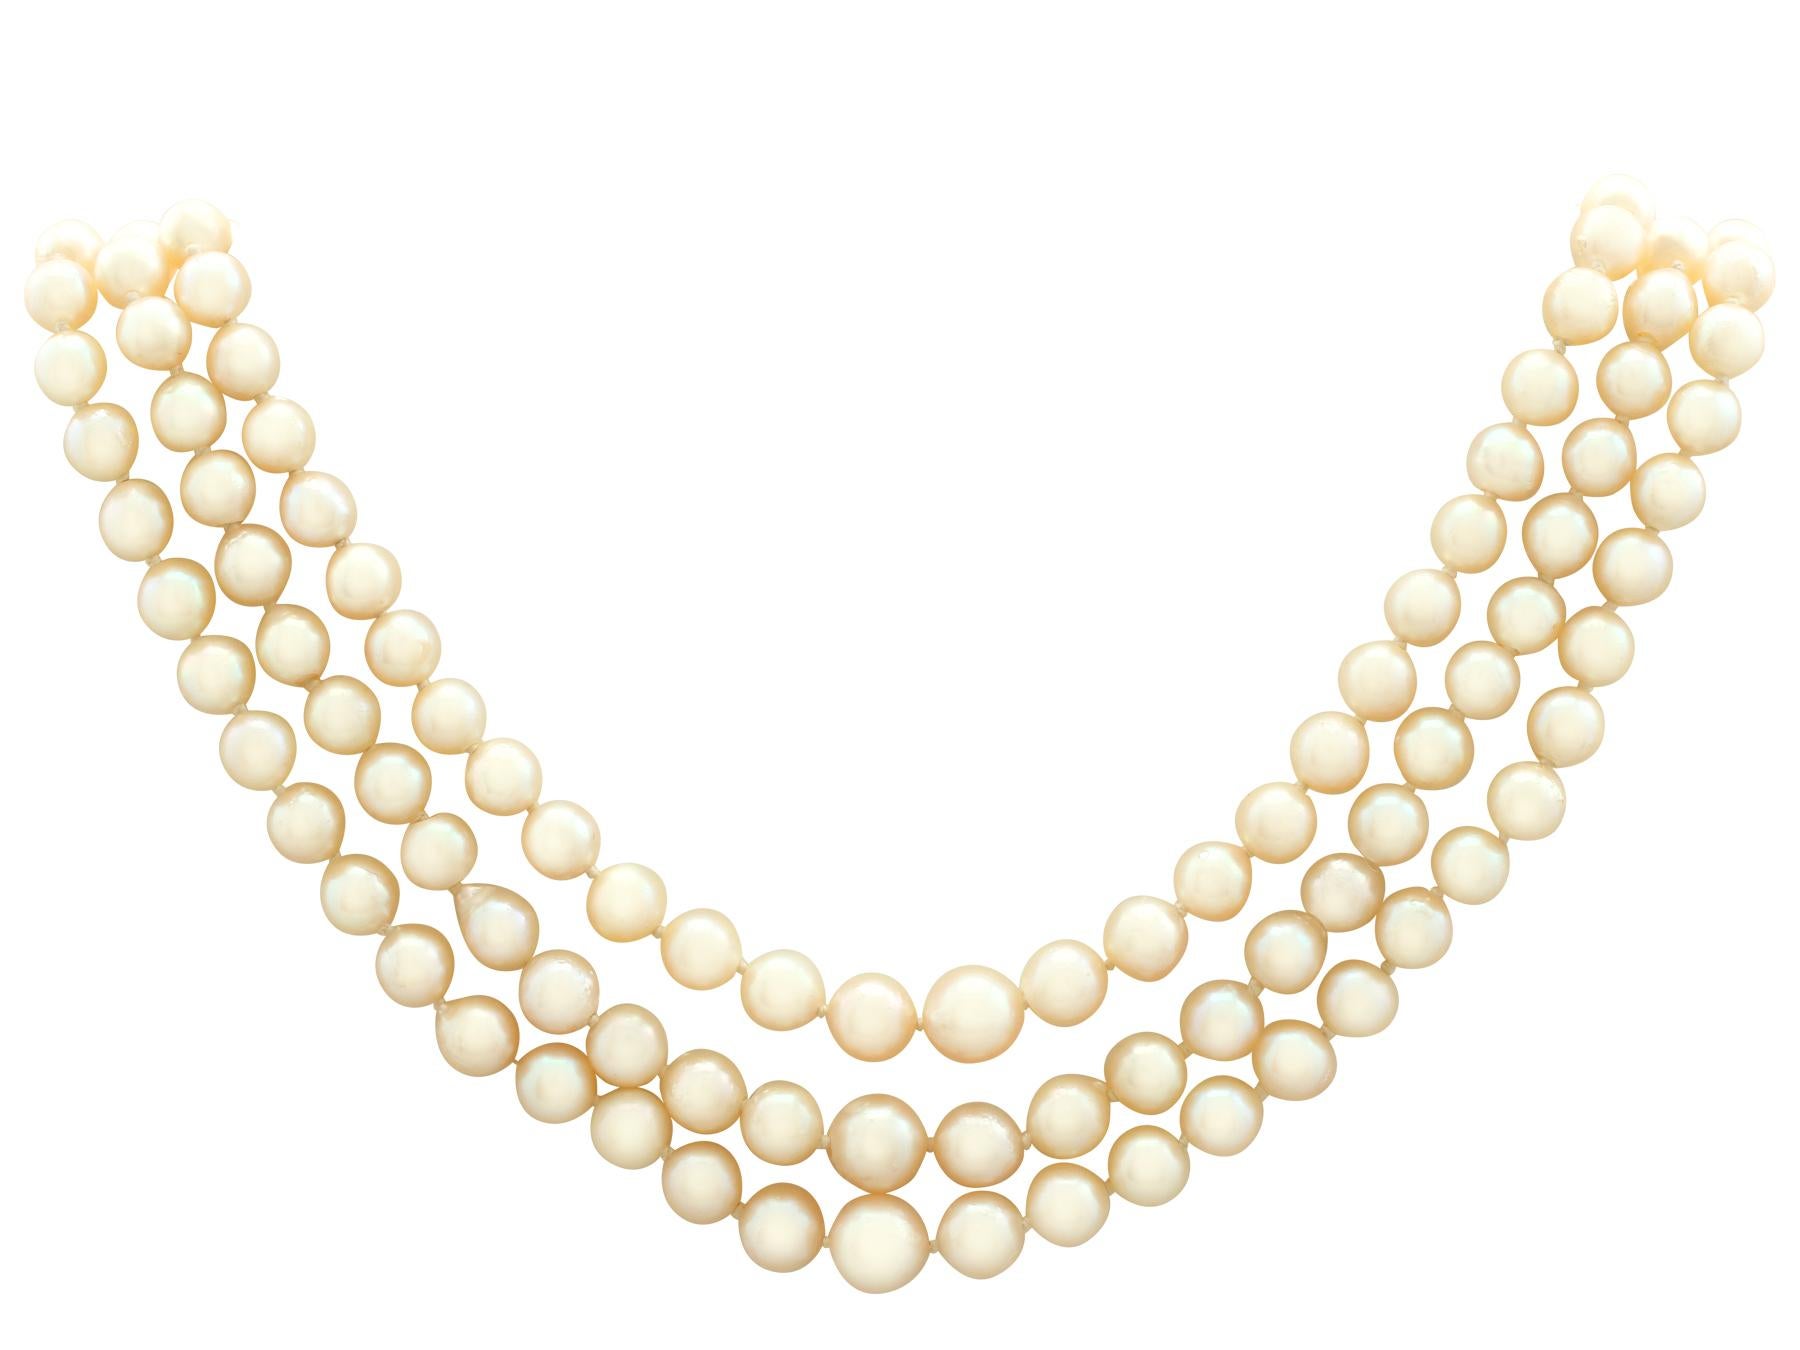 An impressive three strand cultured pearl necklace with seed pearl and 5.91 carat garnet, 9 karat yellow gold push fit clasp; part of our diverse pearl jewelry collections.

This fine and impressive 1970s three strand pearl necklace is composed of a